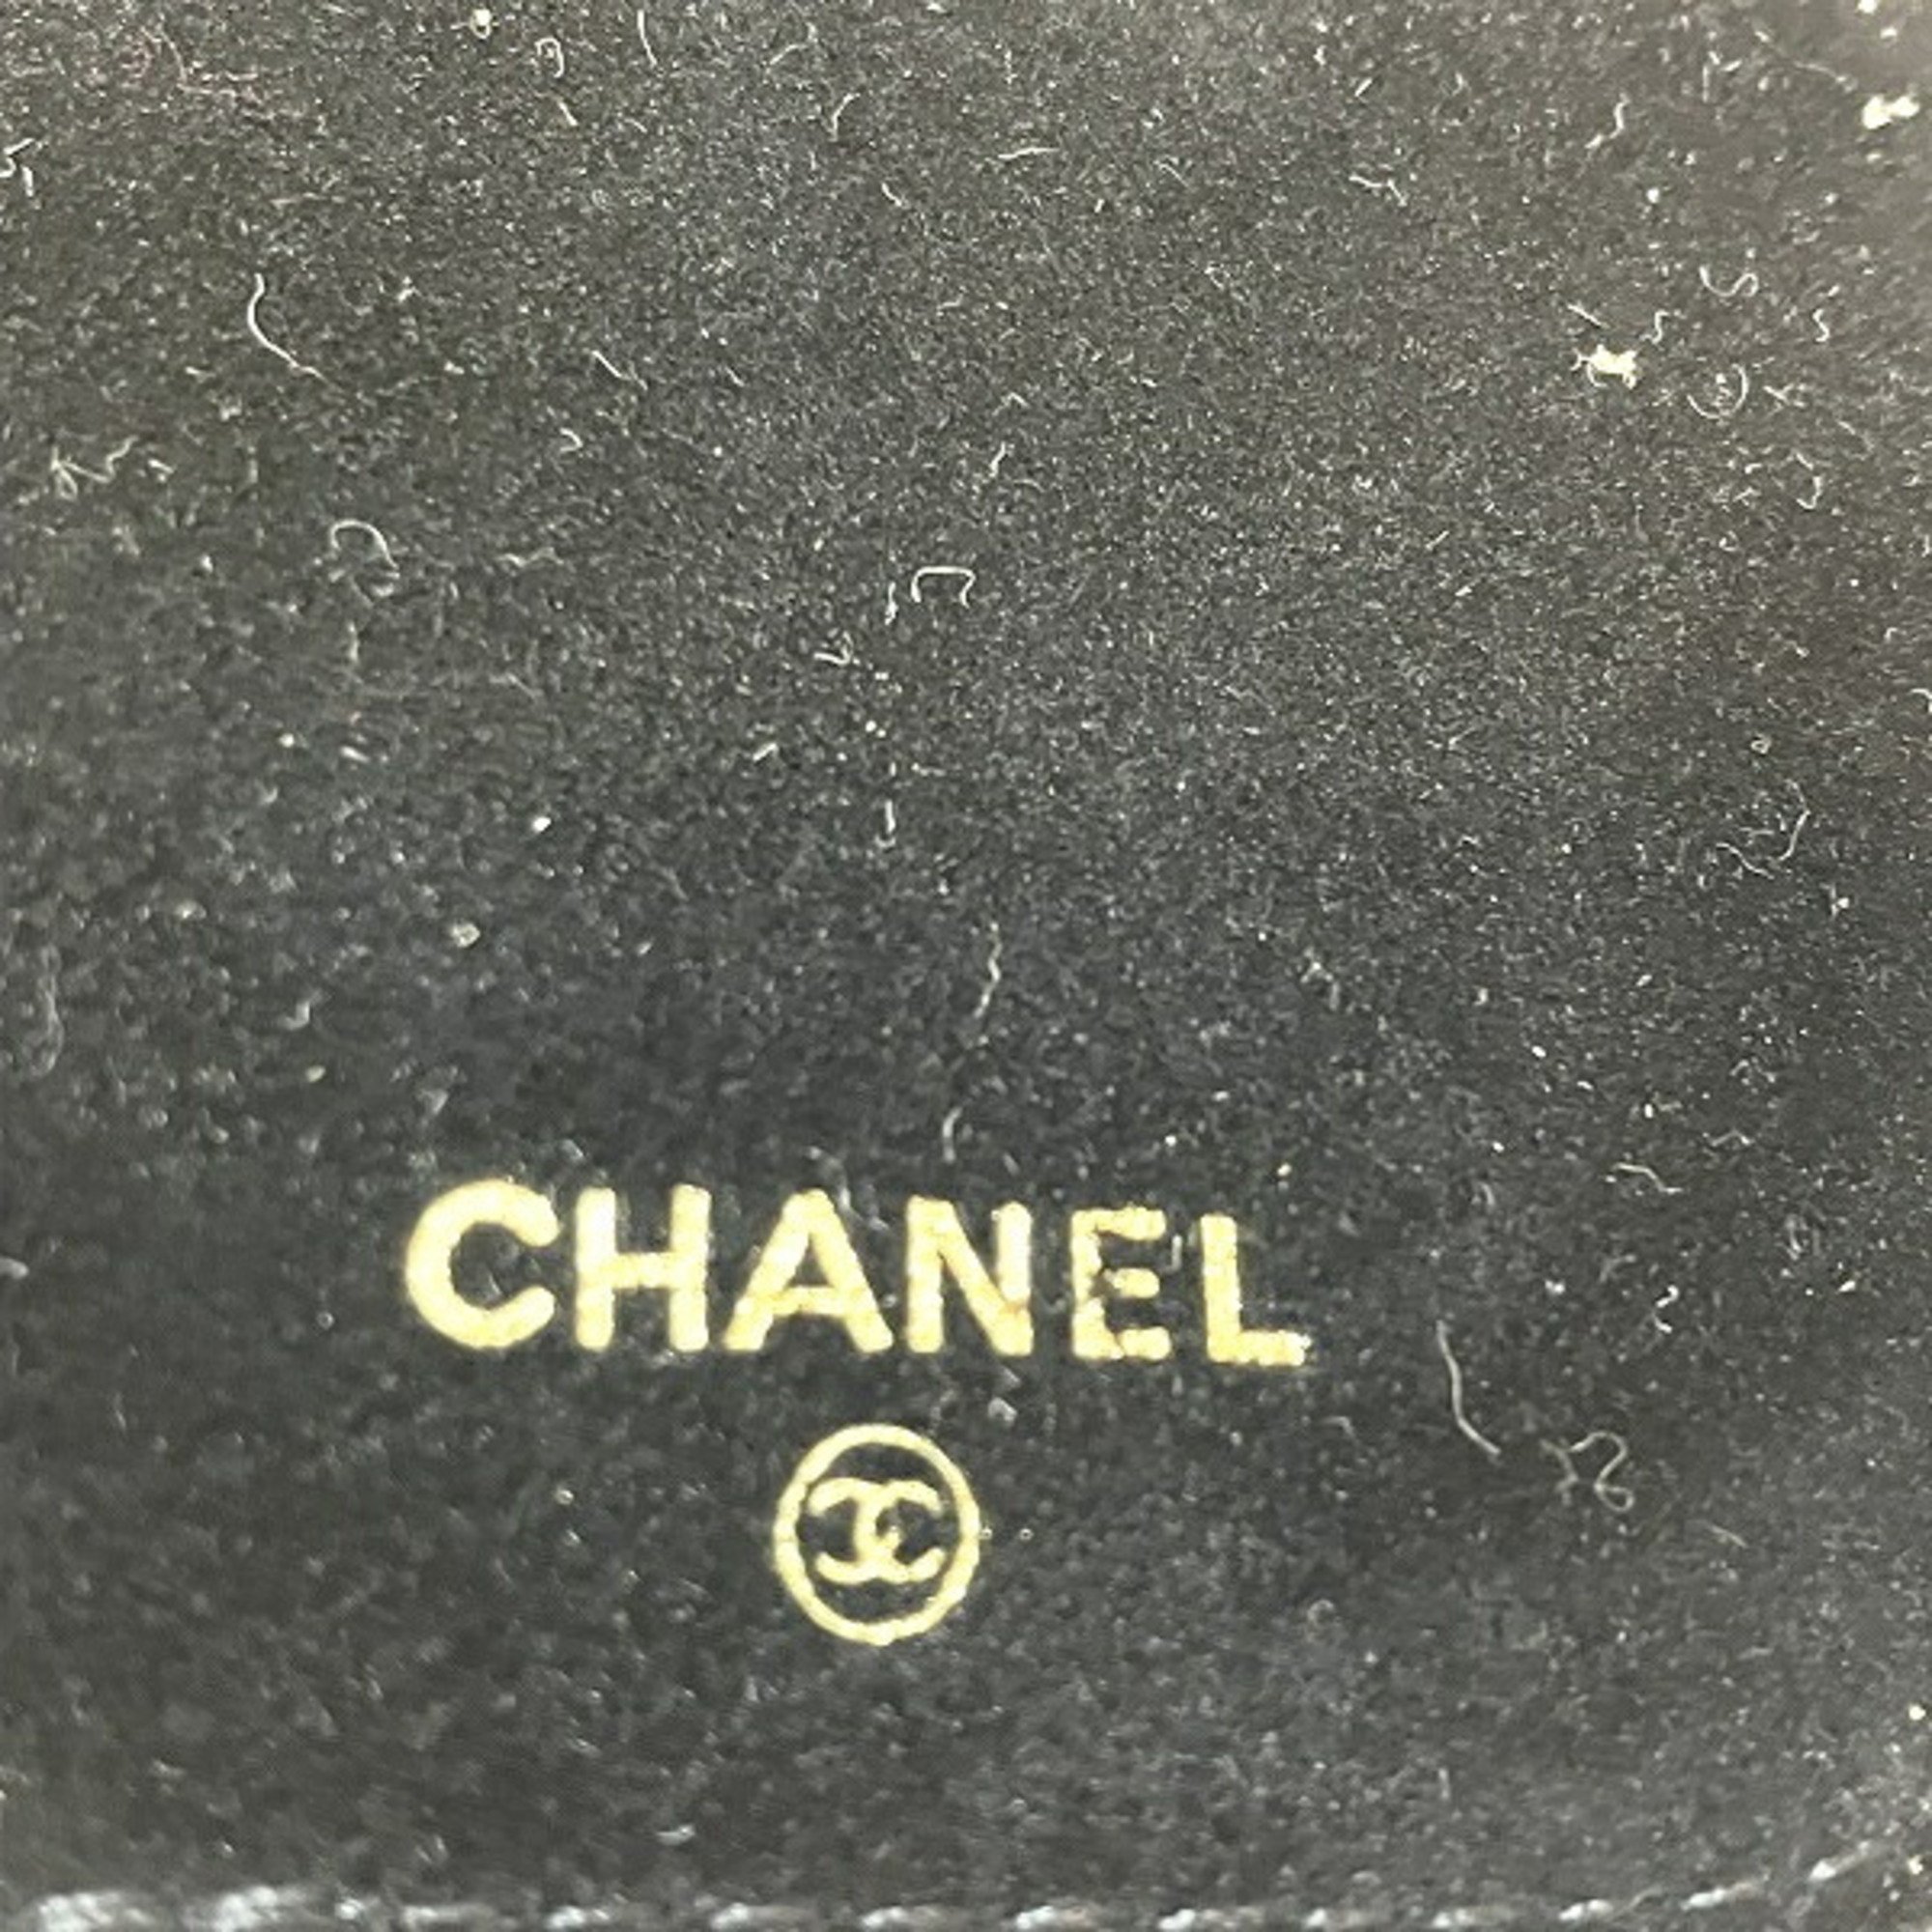 CHANEL Cocomark Brand Accessories Jewelry Pouch Women's Bag